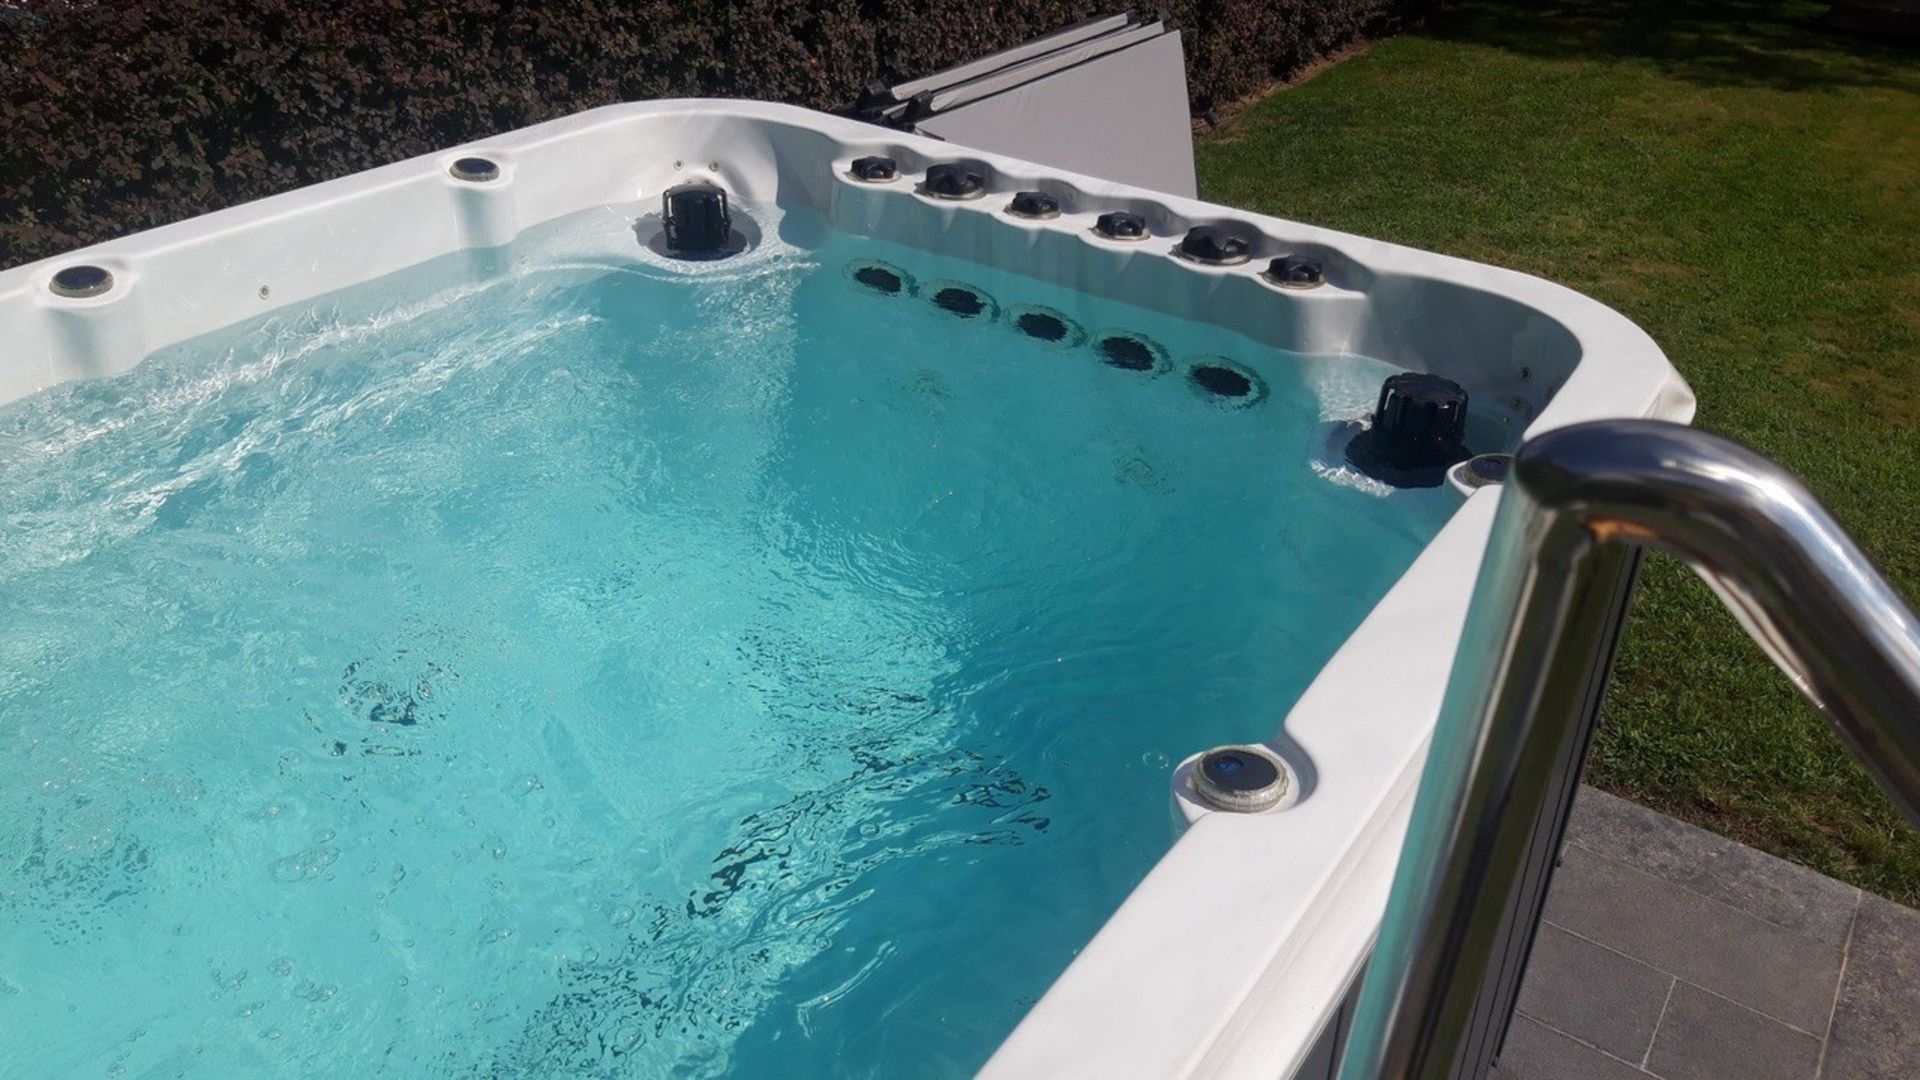 1 x Swim-Spa Activity 1 - Brand New With Warranty - RRP: £18,790 - CL774 - Location: Nationwide - Image 3 of 5